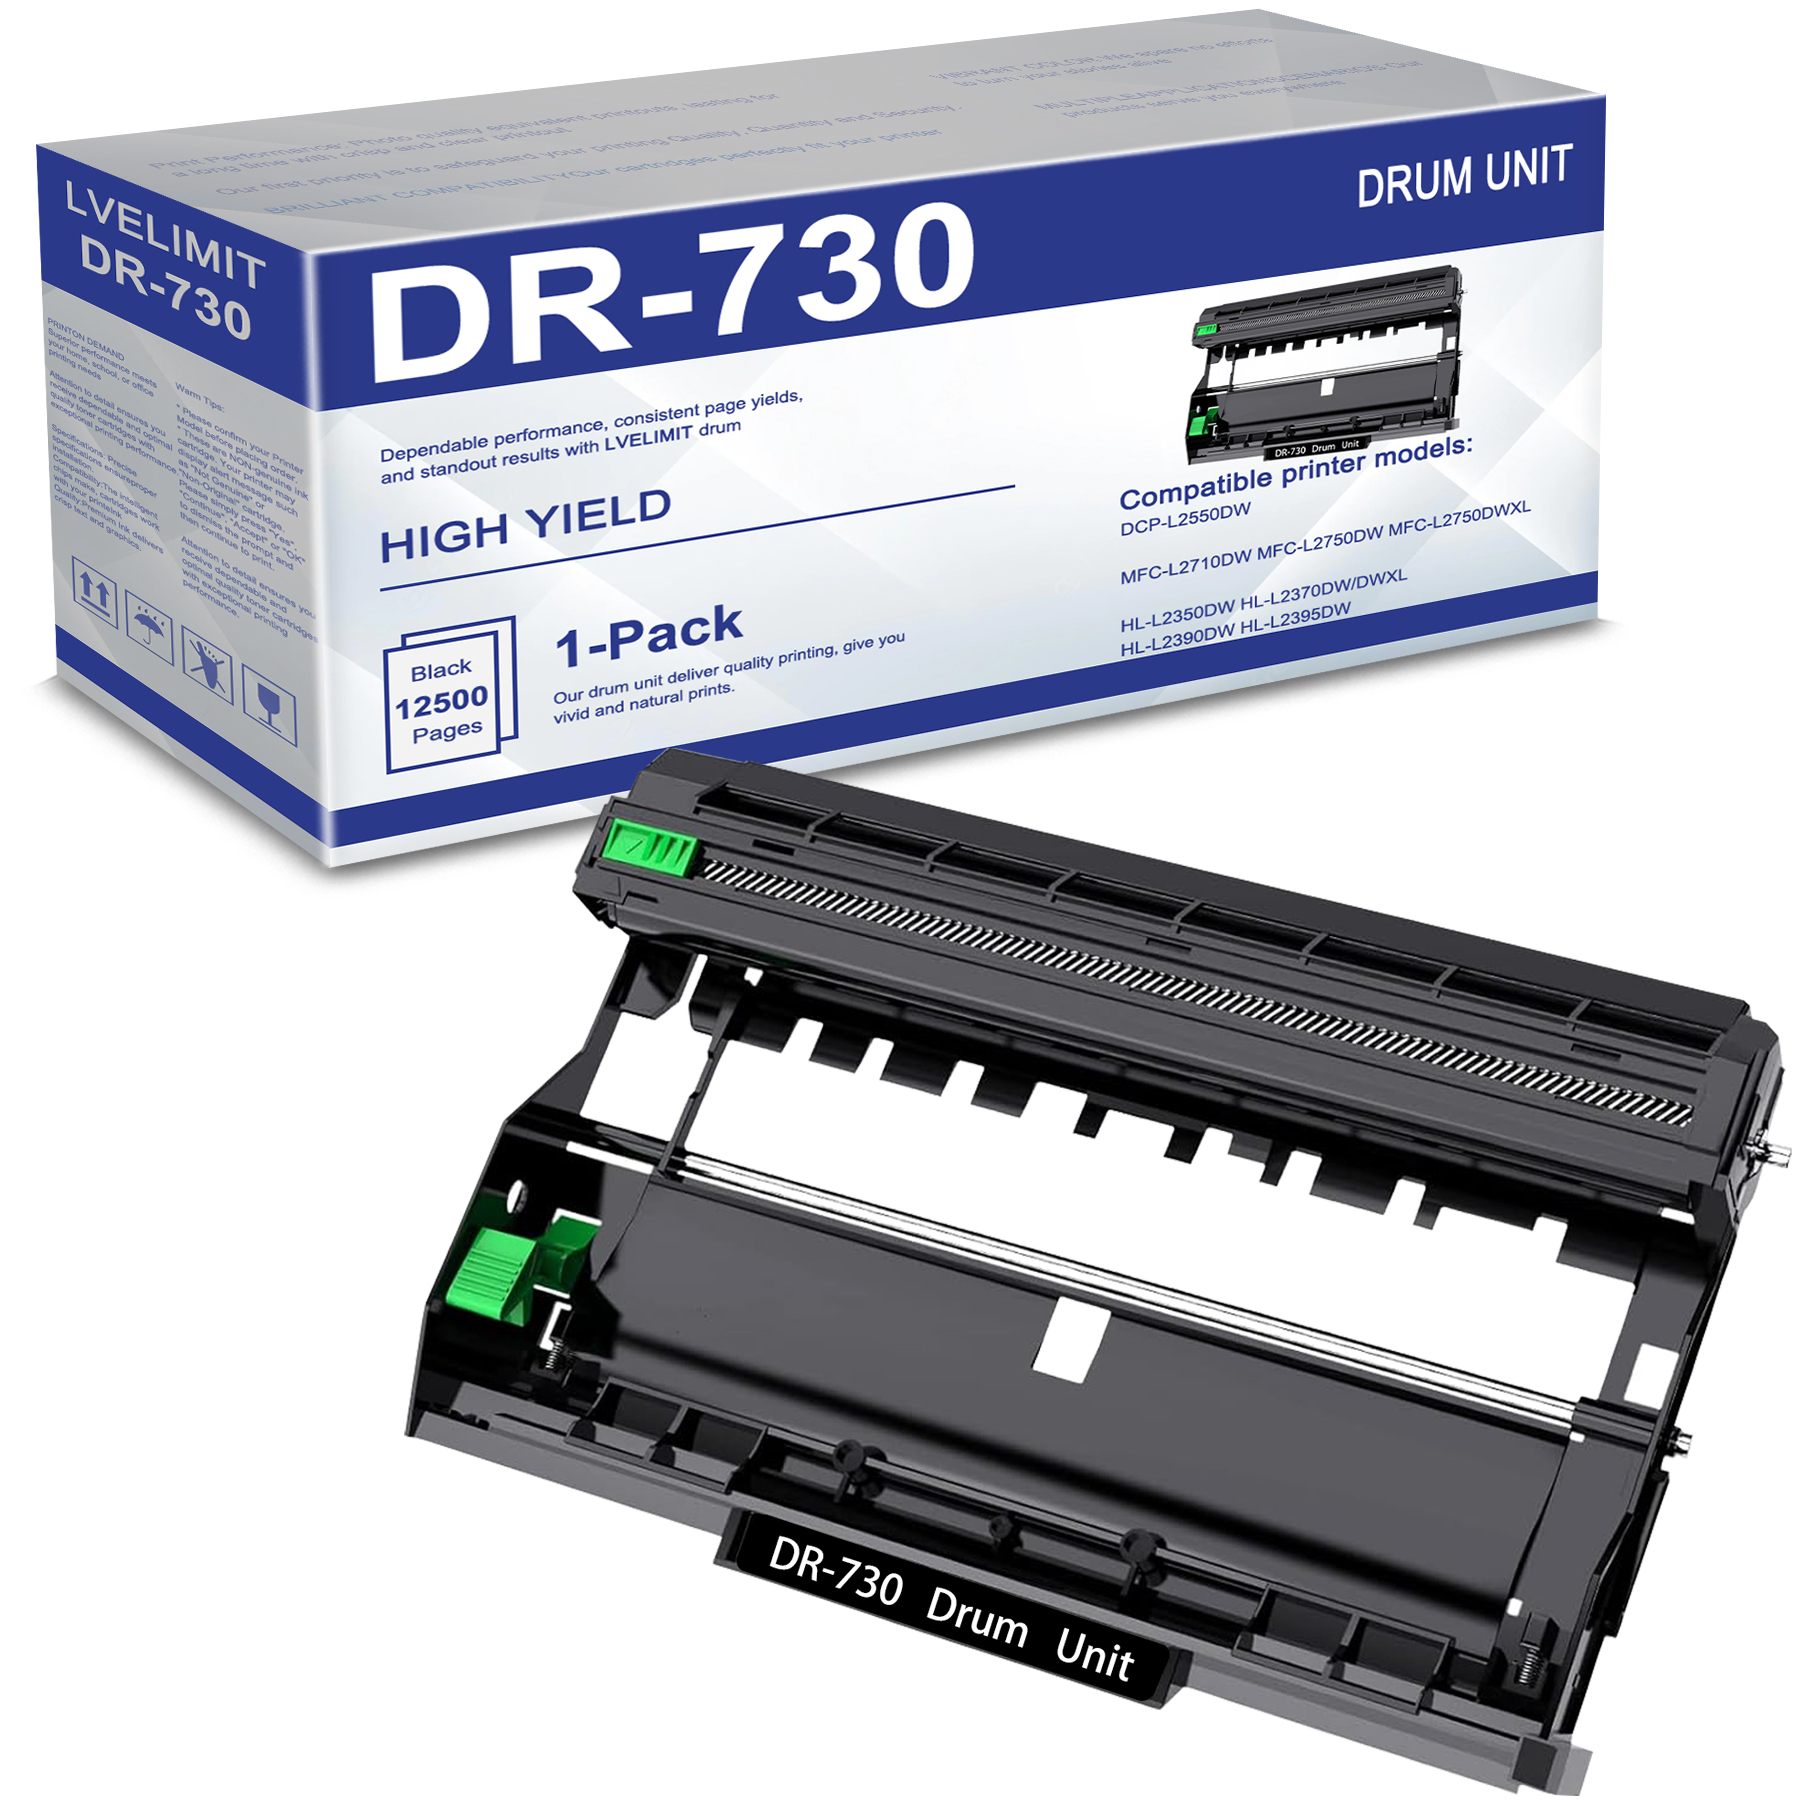 DR730 High Yield Black Drum Unit Replacement for Brother MFC-L2750DW Printer - image 1 of 5